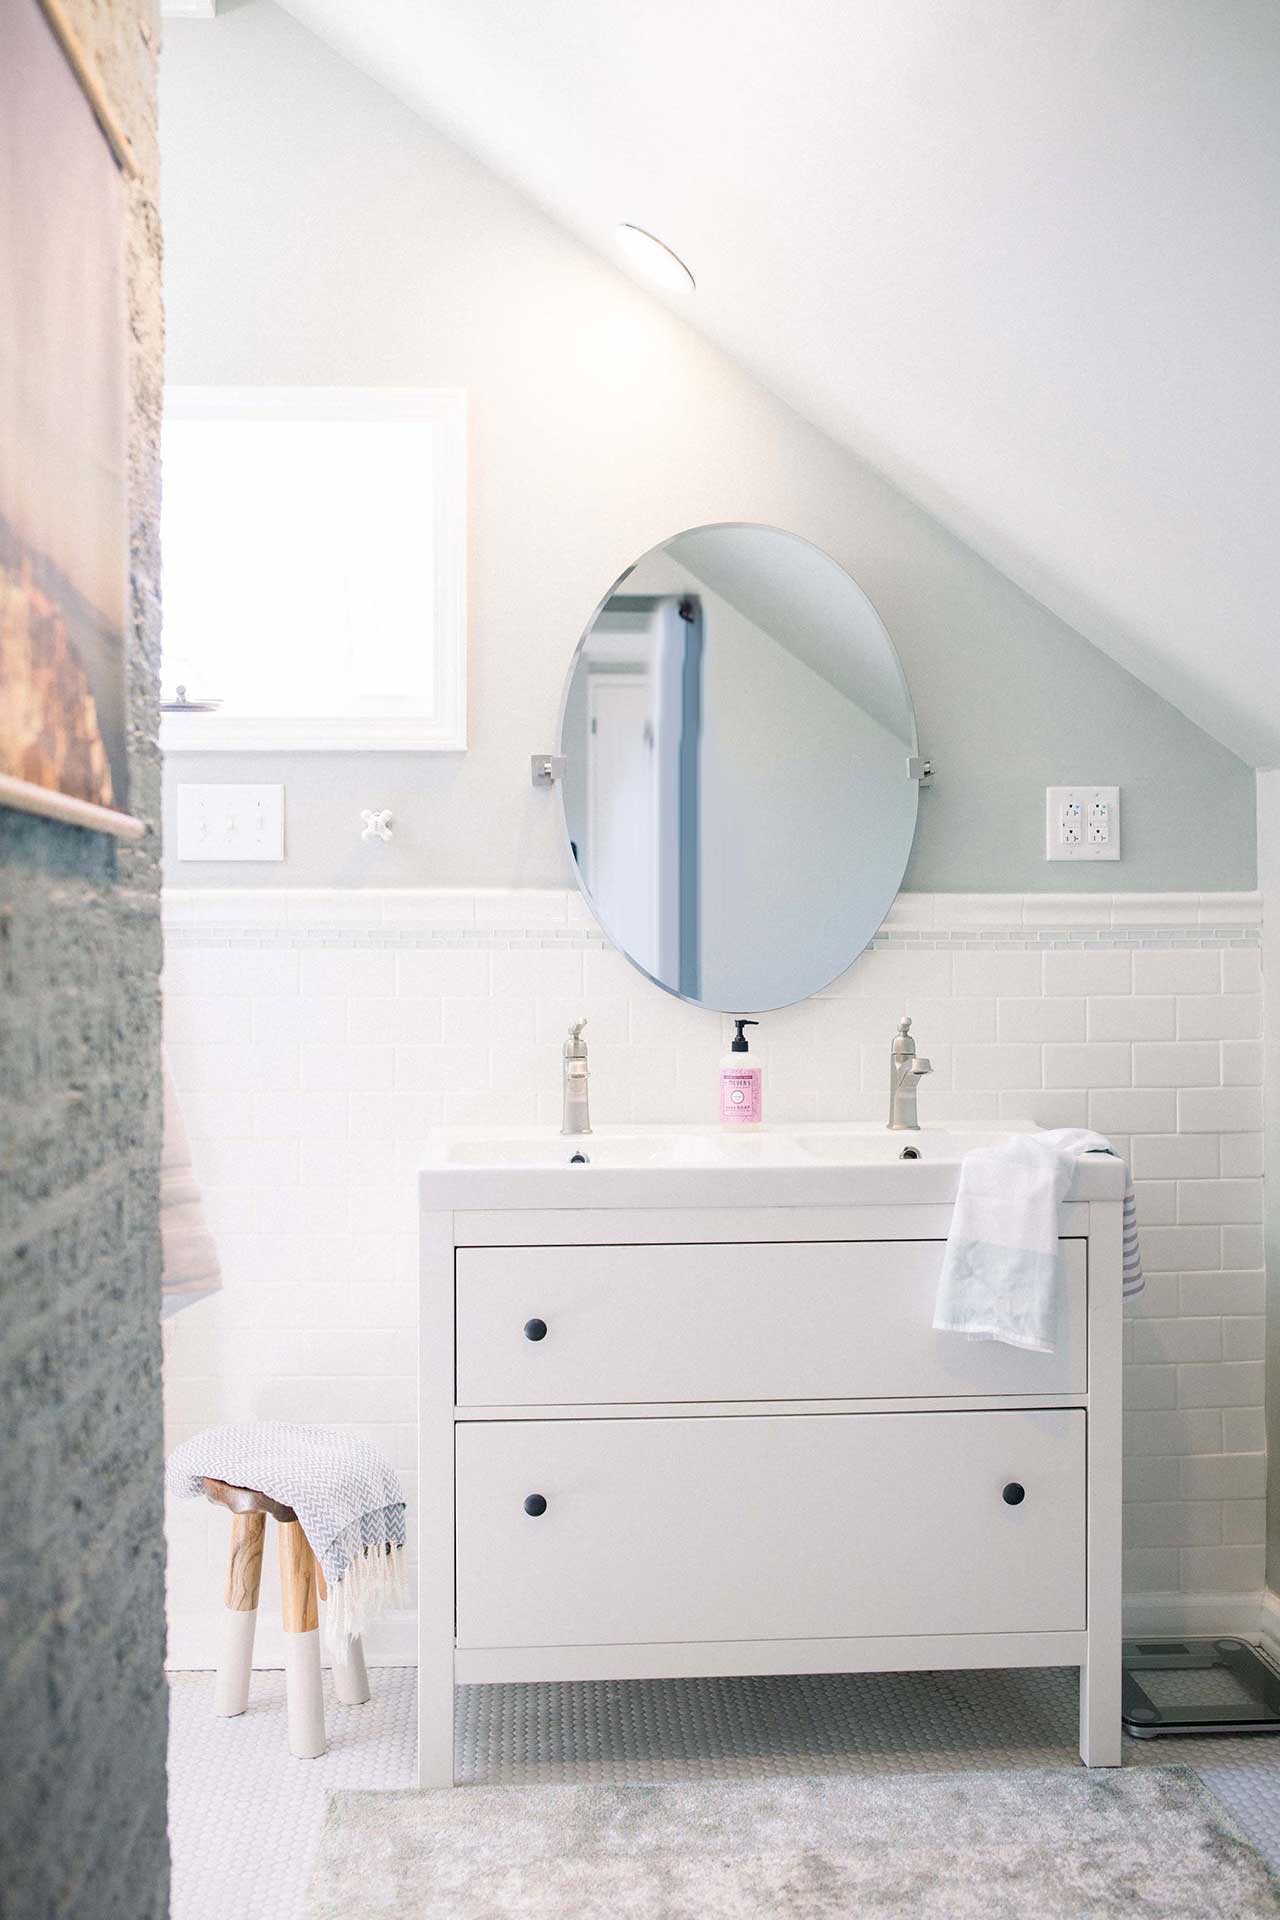 Before & After: Attic Master Bathroom